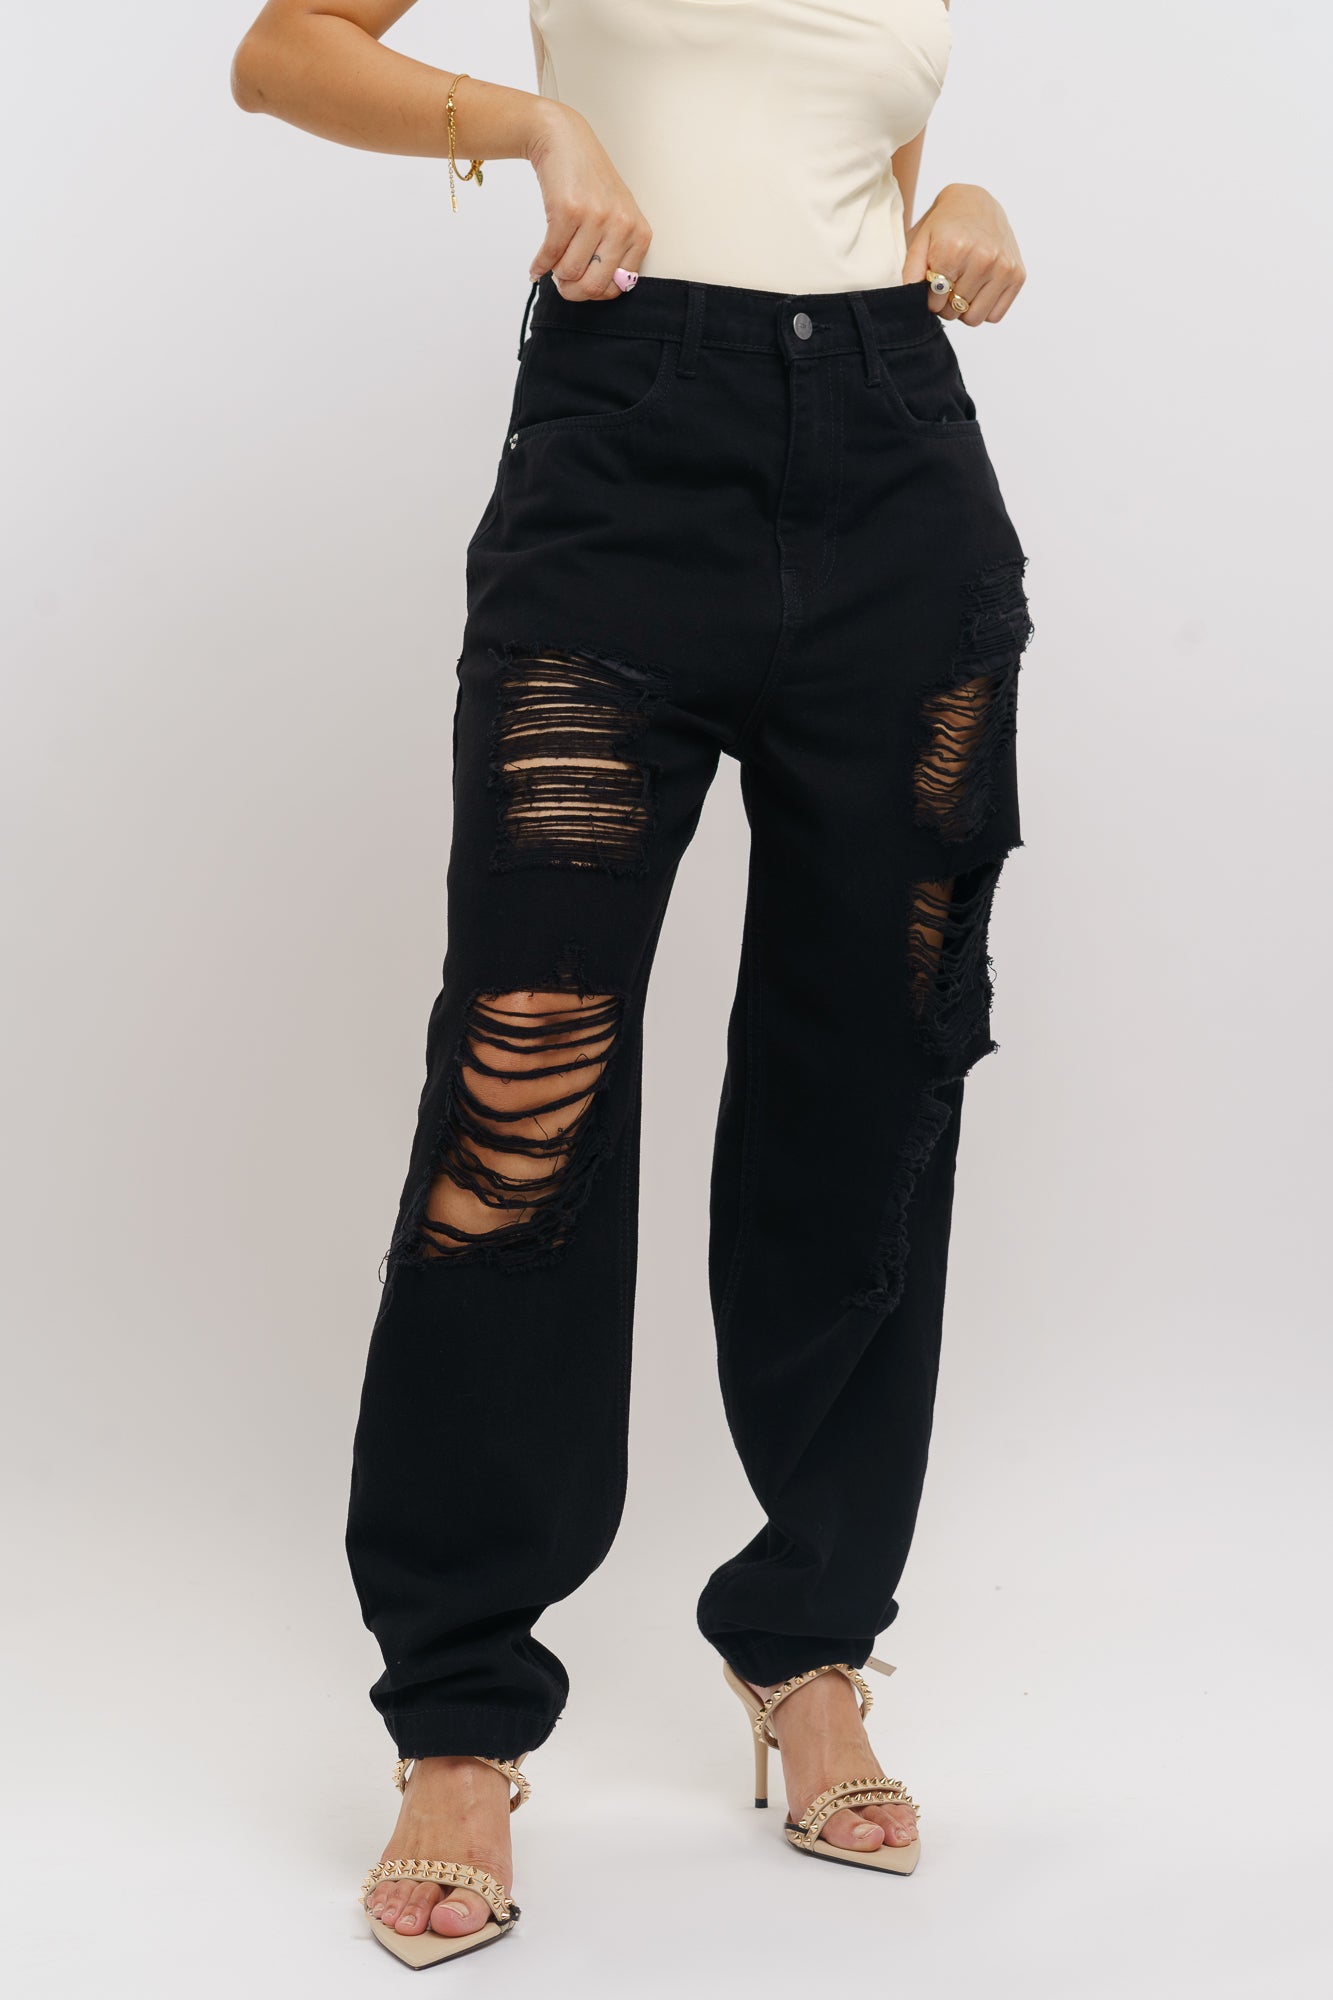 Discover 199+ black baggy jeans womens super hot